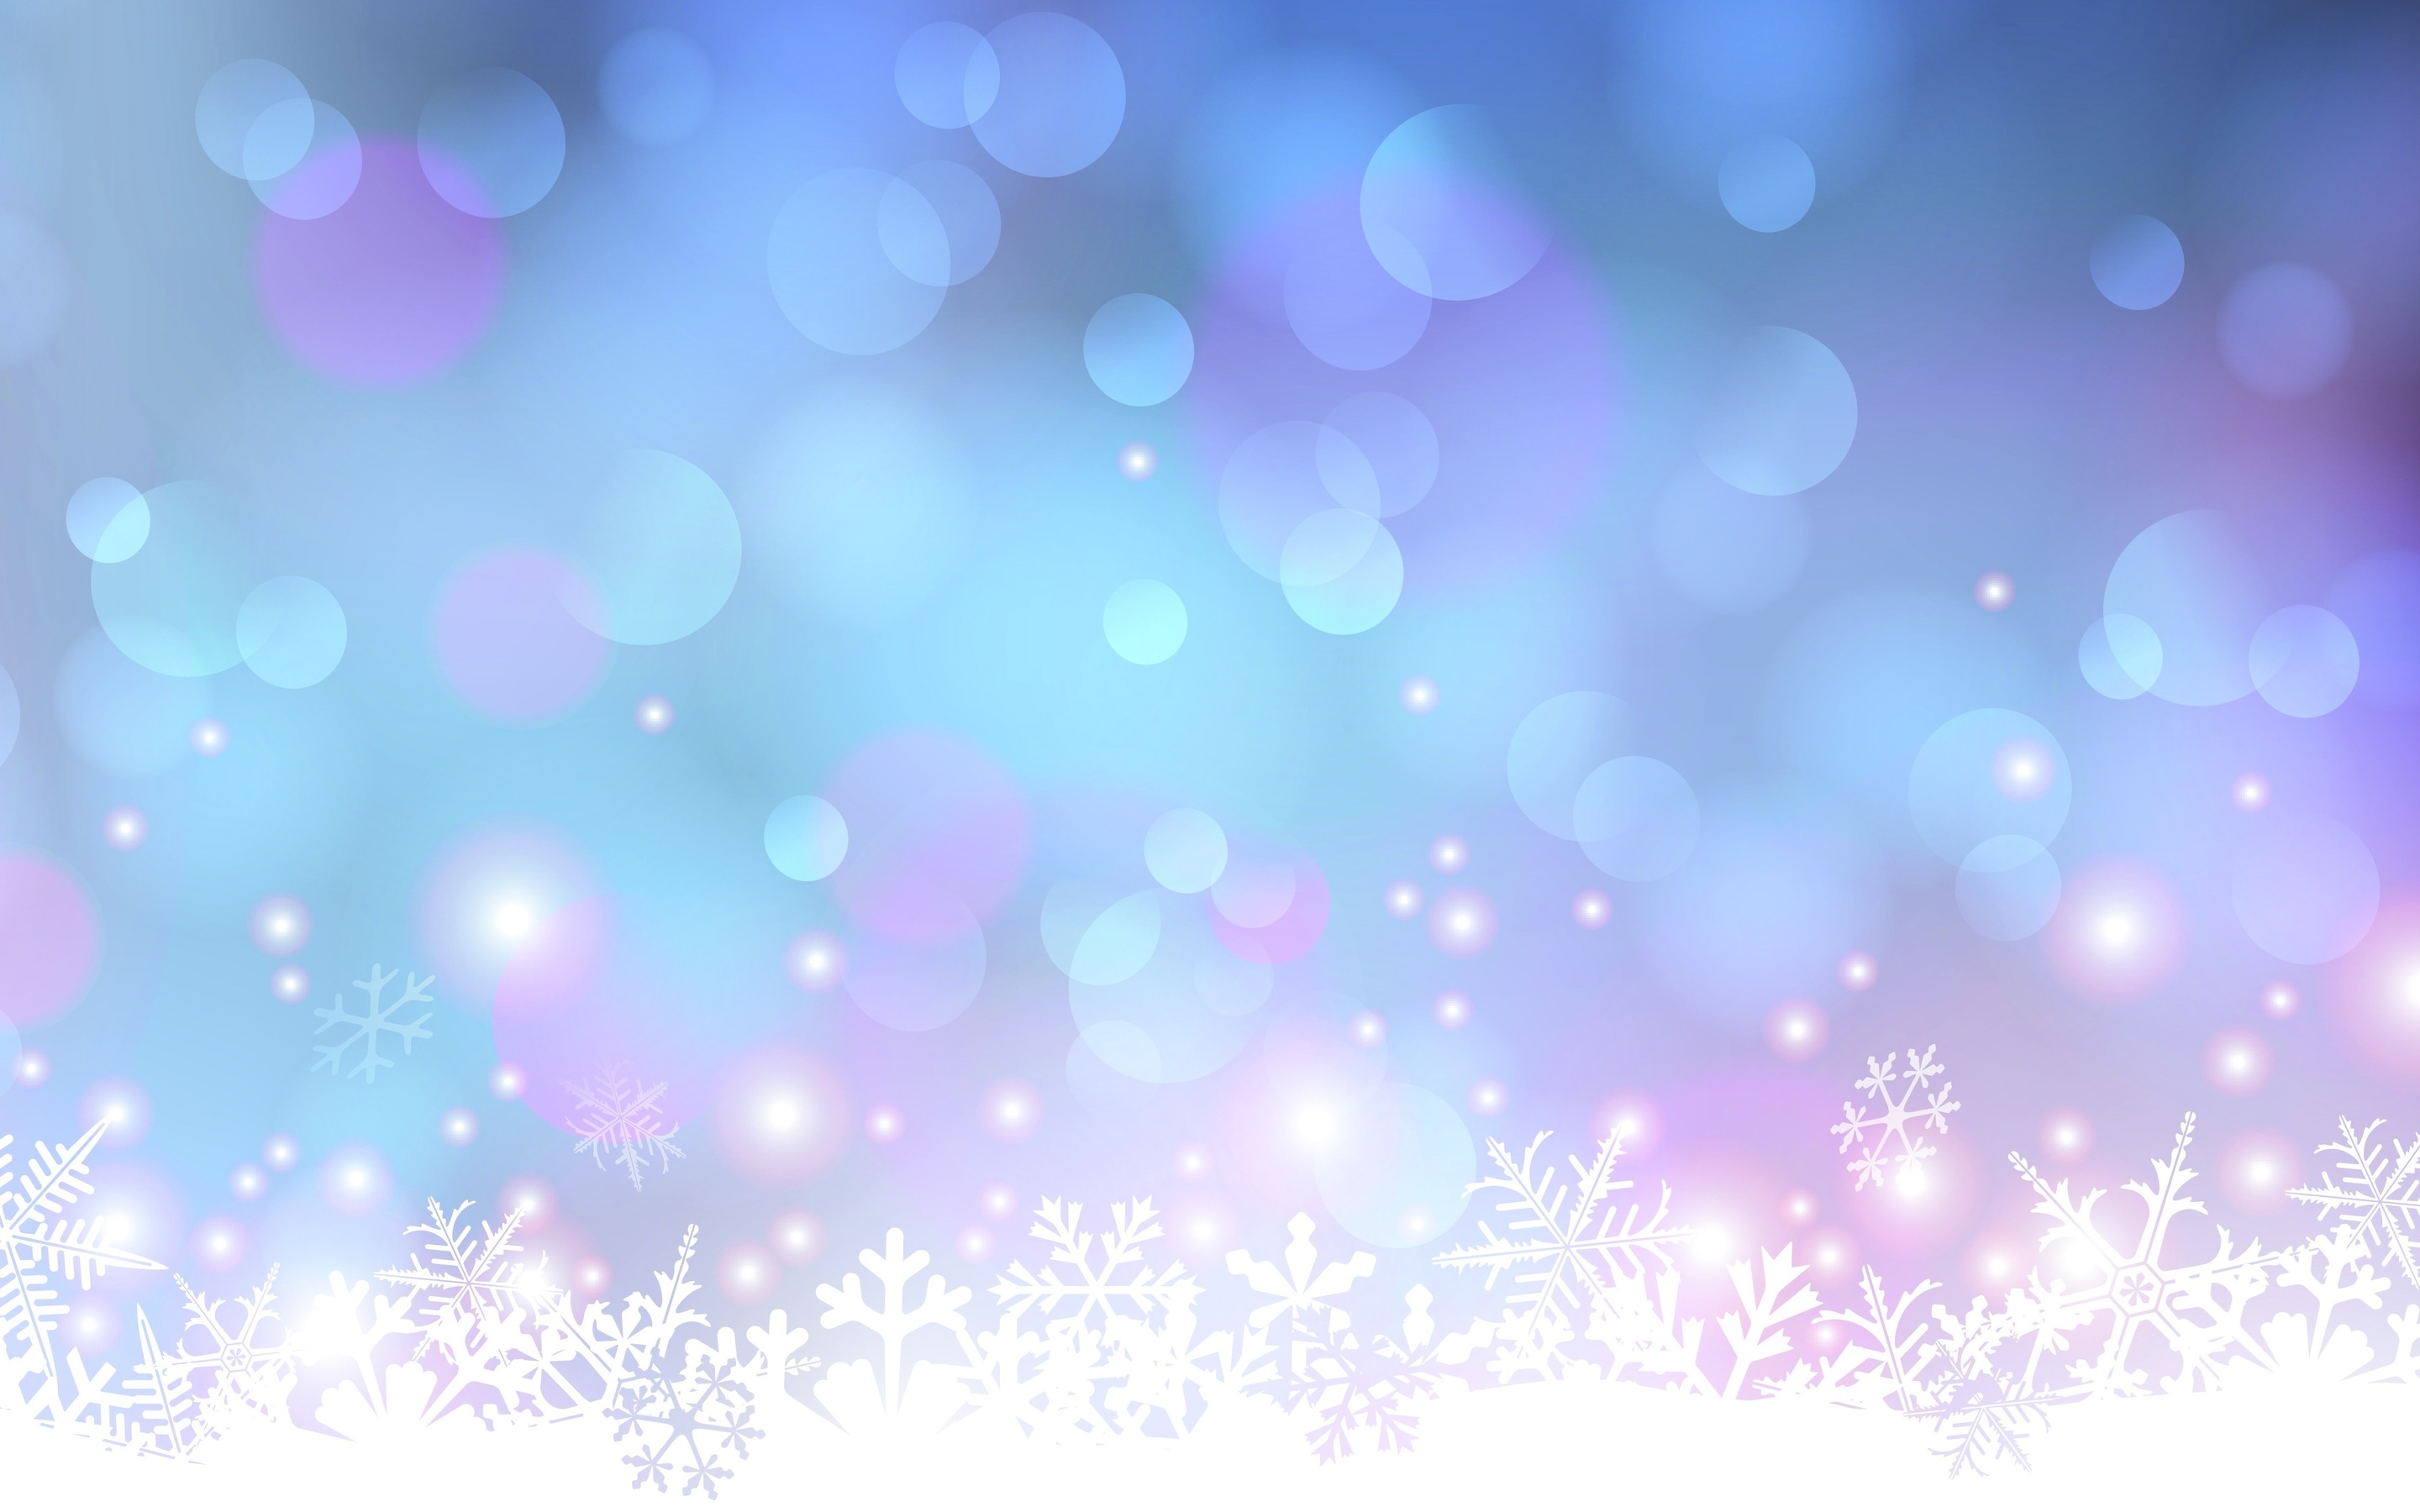 Chistmas backgrounds